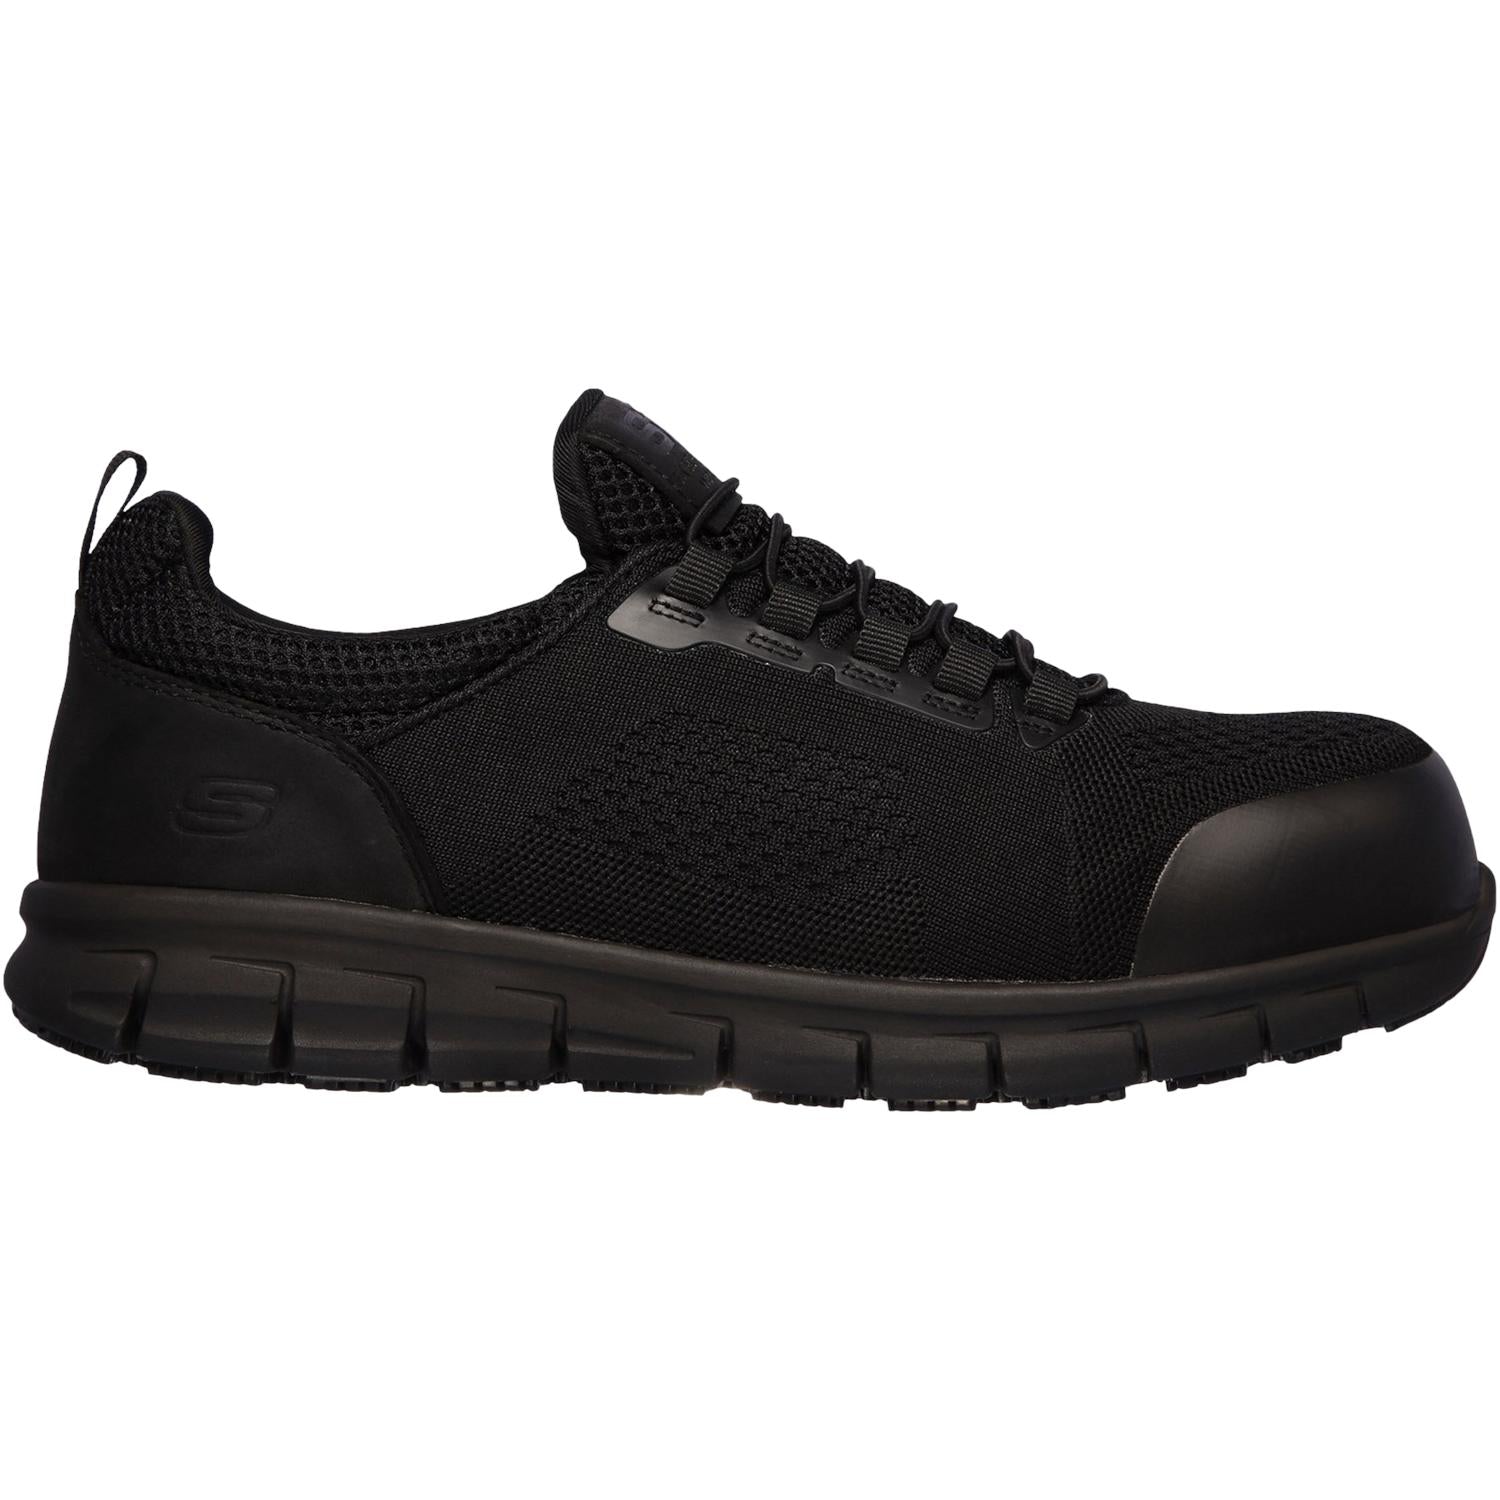 Skechers Synergy Omat Safety Trainer